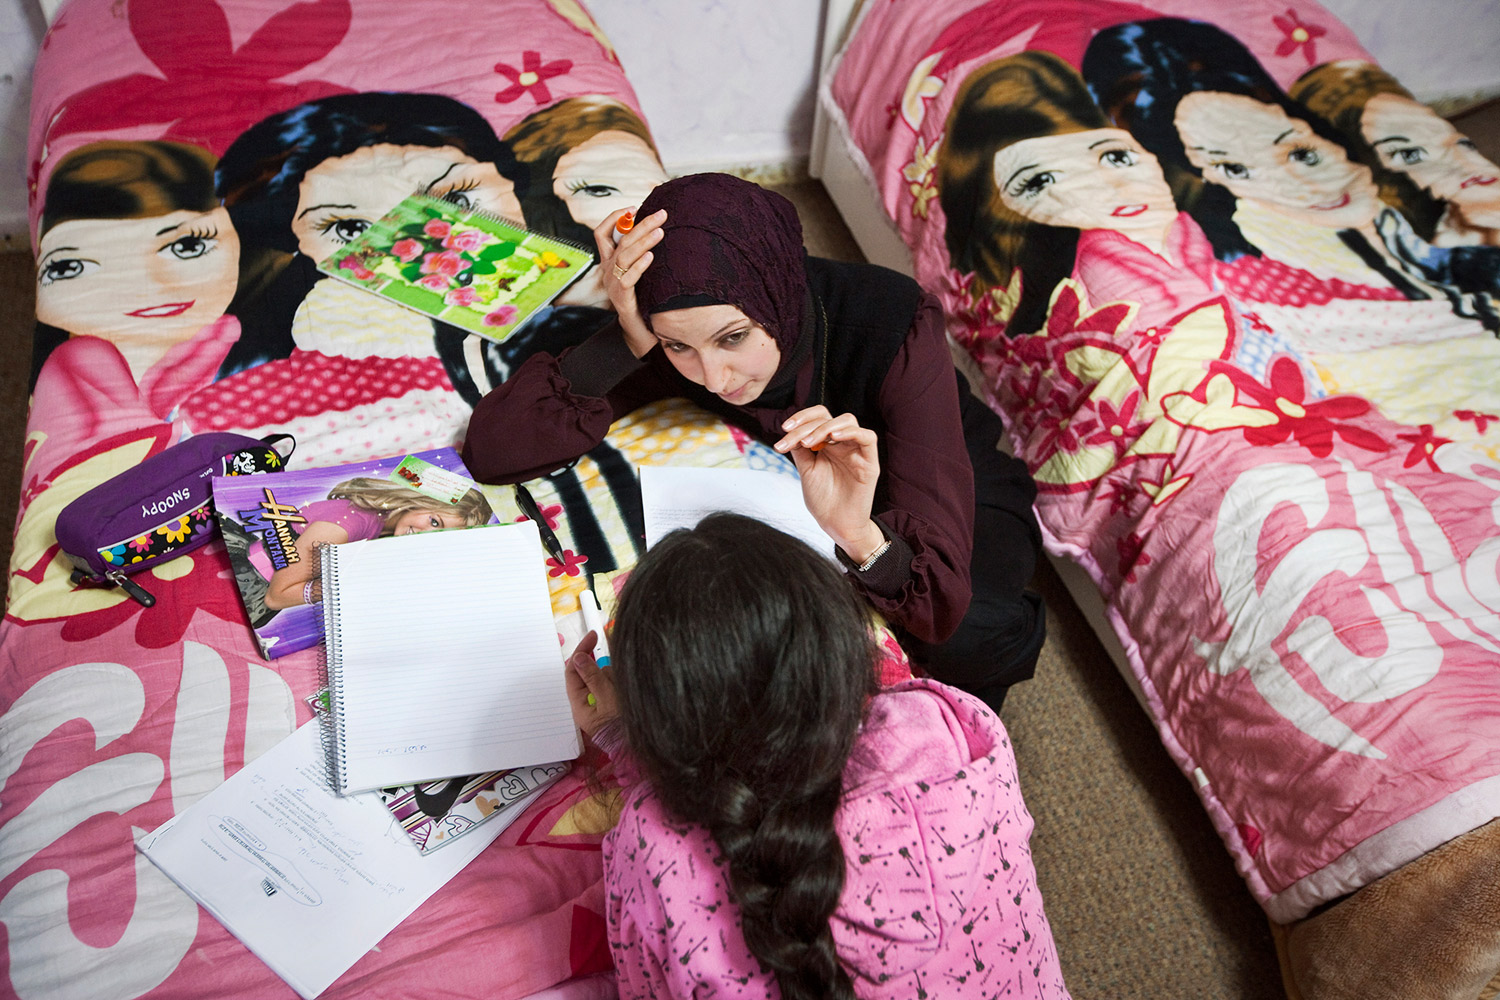 Angham Amin Issa, 18, top, helps her sister Johaina,10, with her homework. Most Arab families have many children, forcing the older to help their younger siblings.